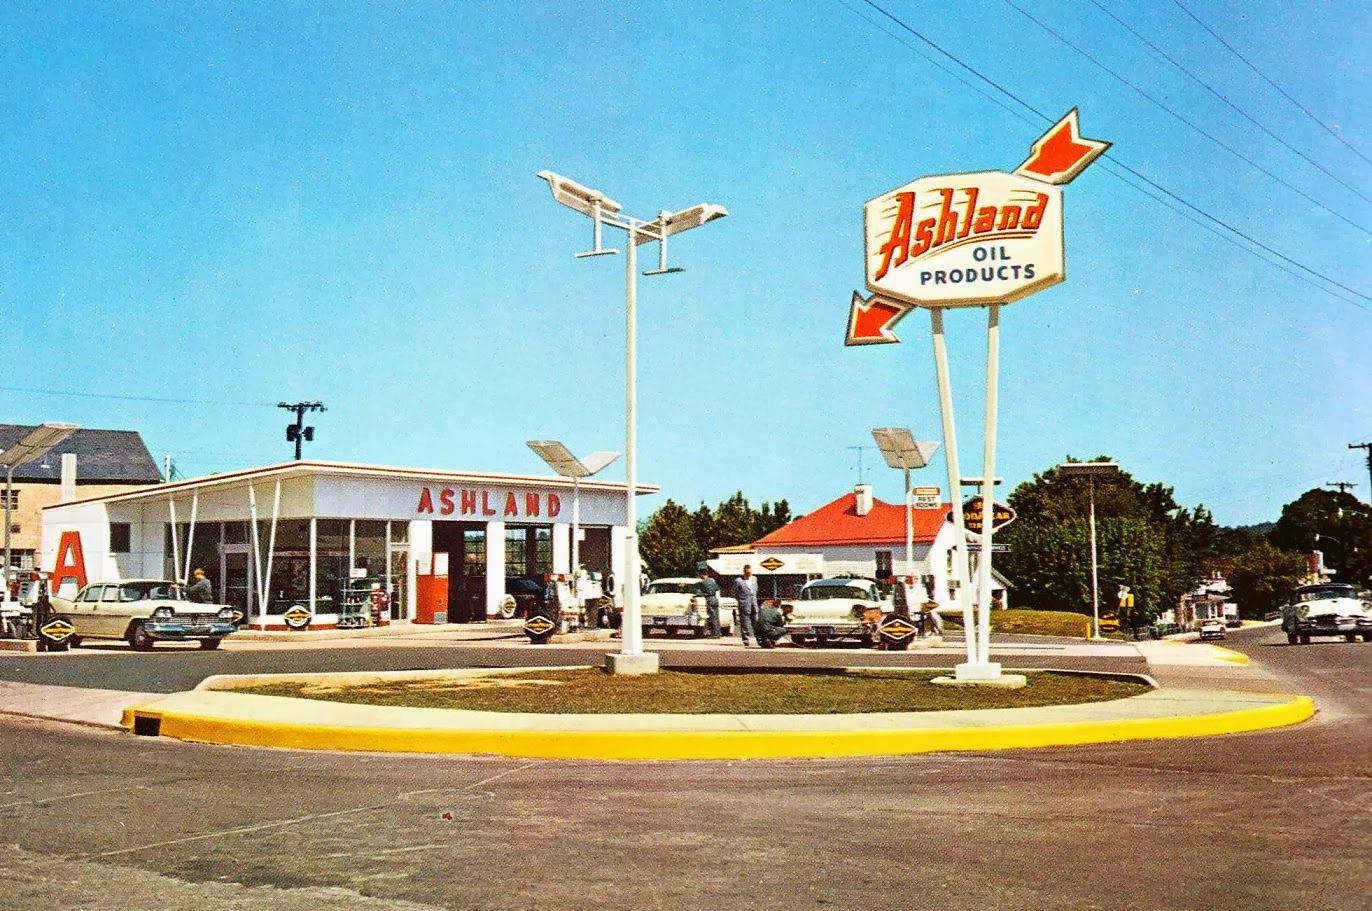 MOTORCYCLE 74: The Golden age of gas stations